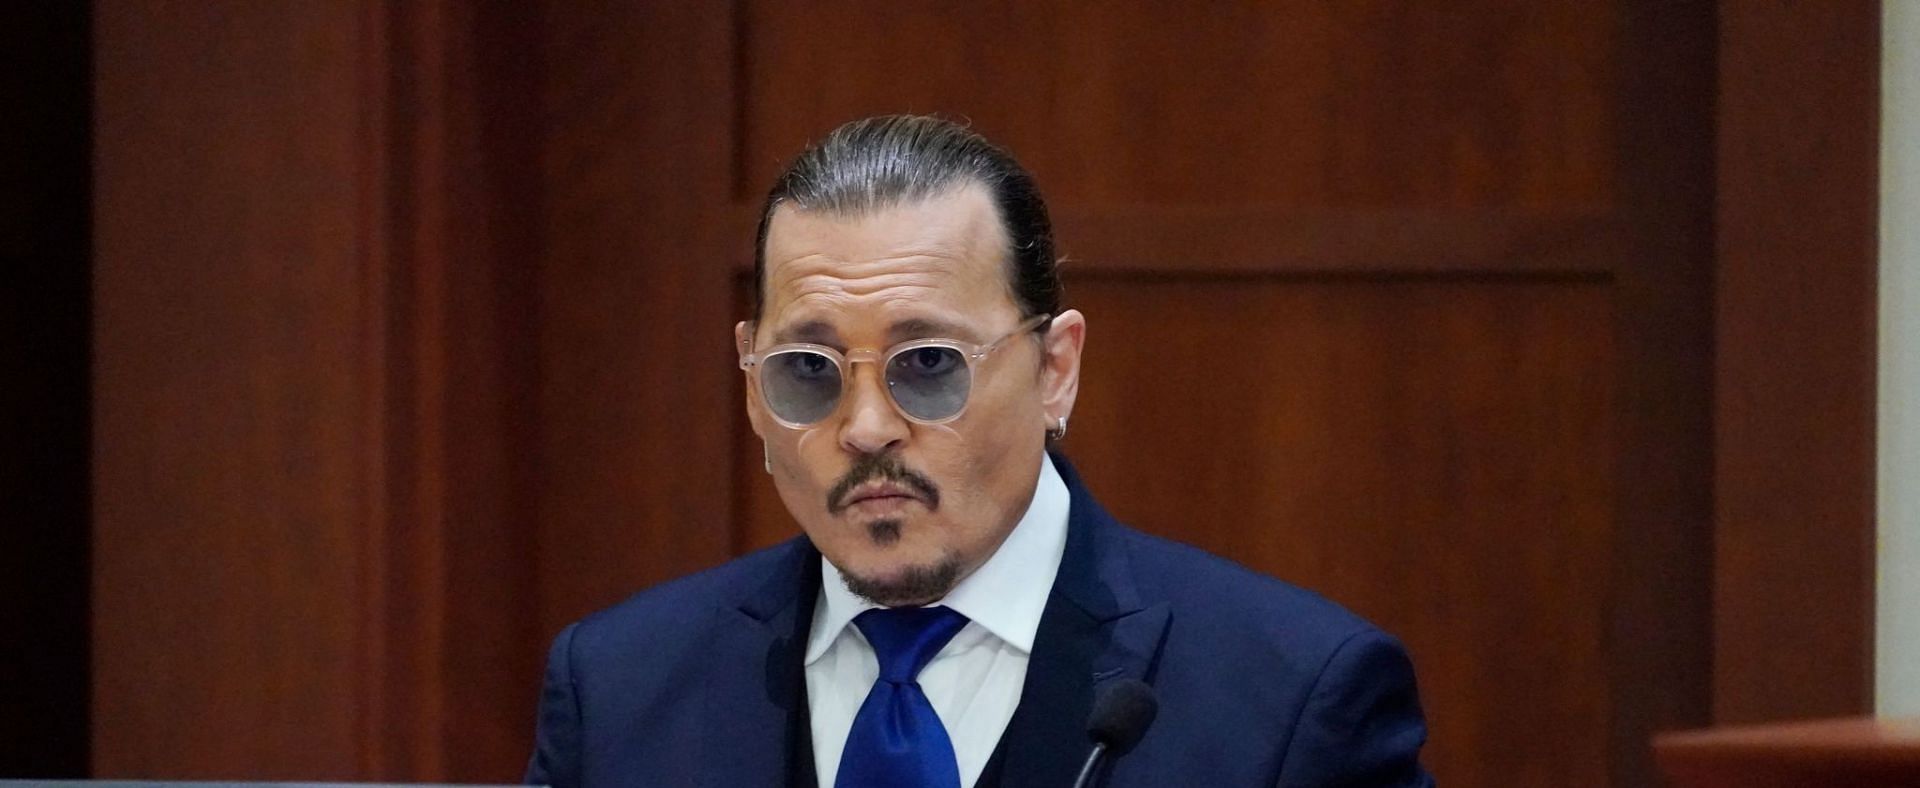 Although Johnny Depp won his defamation lawsuit against Heard in the US, he lost a similar case against The Sun in the US (Image via Getty Images)